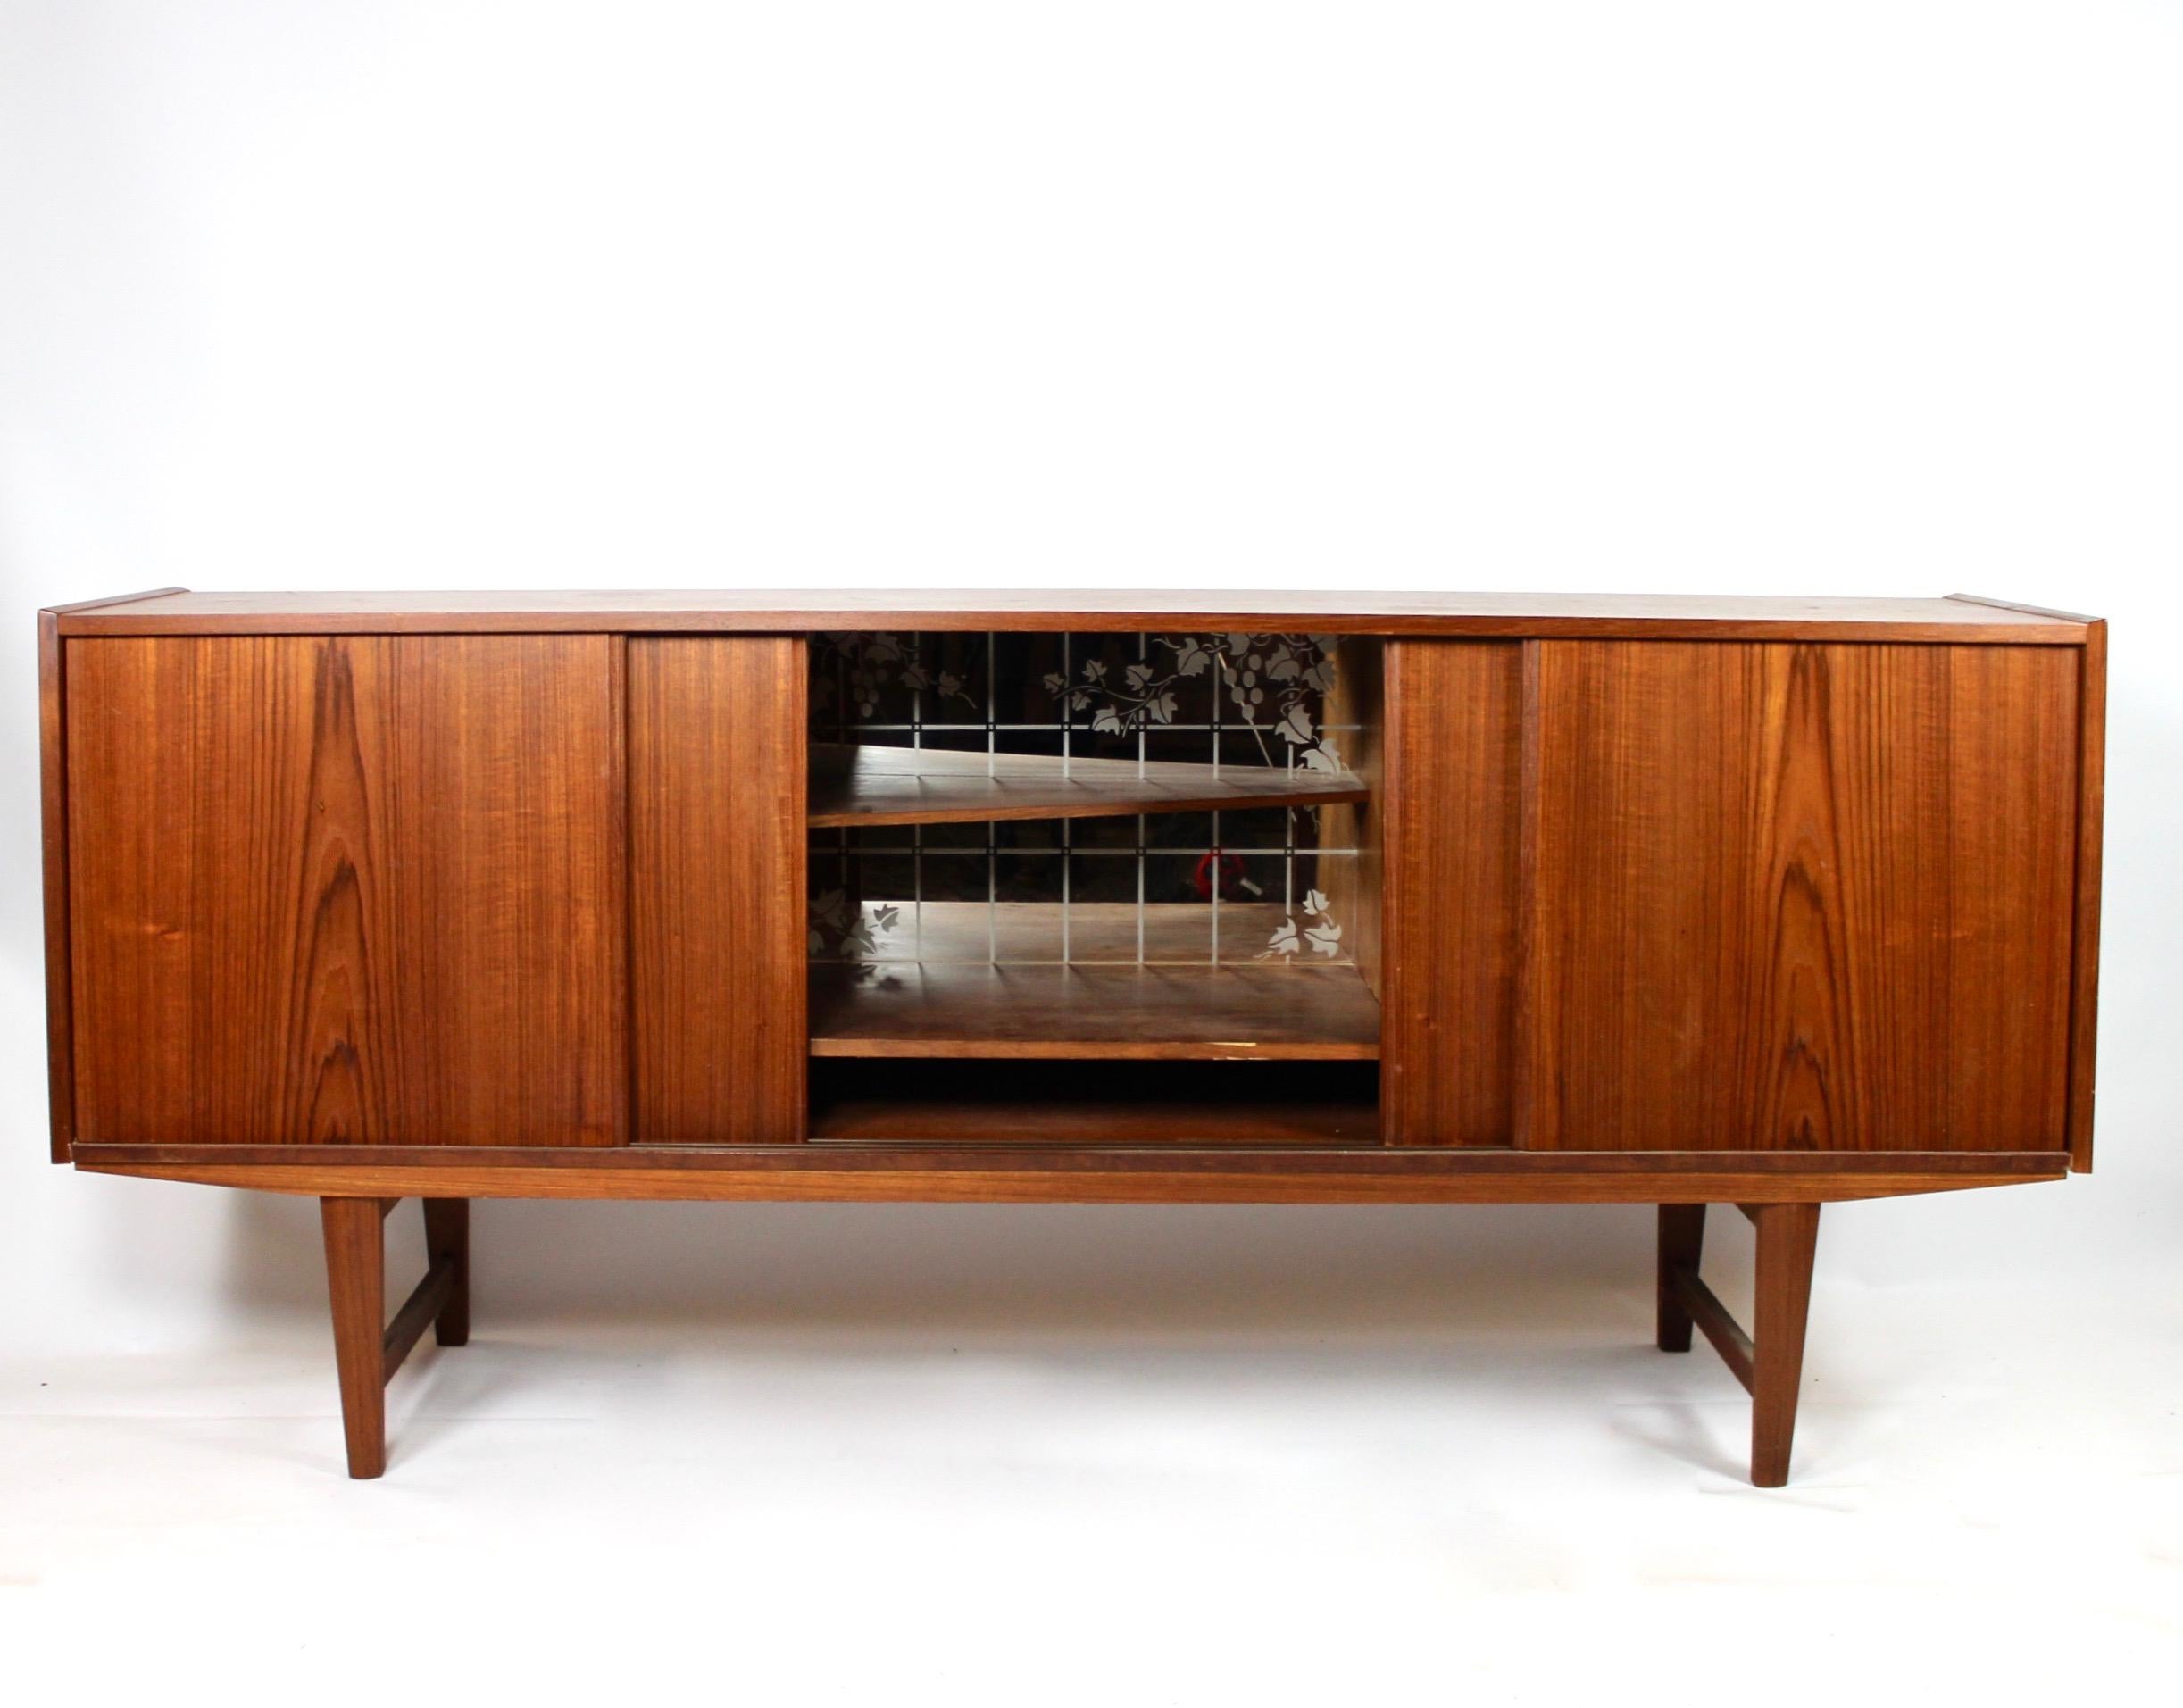 Mid-20th Century Wide Sideboard in Teak of Danish Design from the 1960s